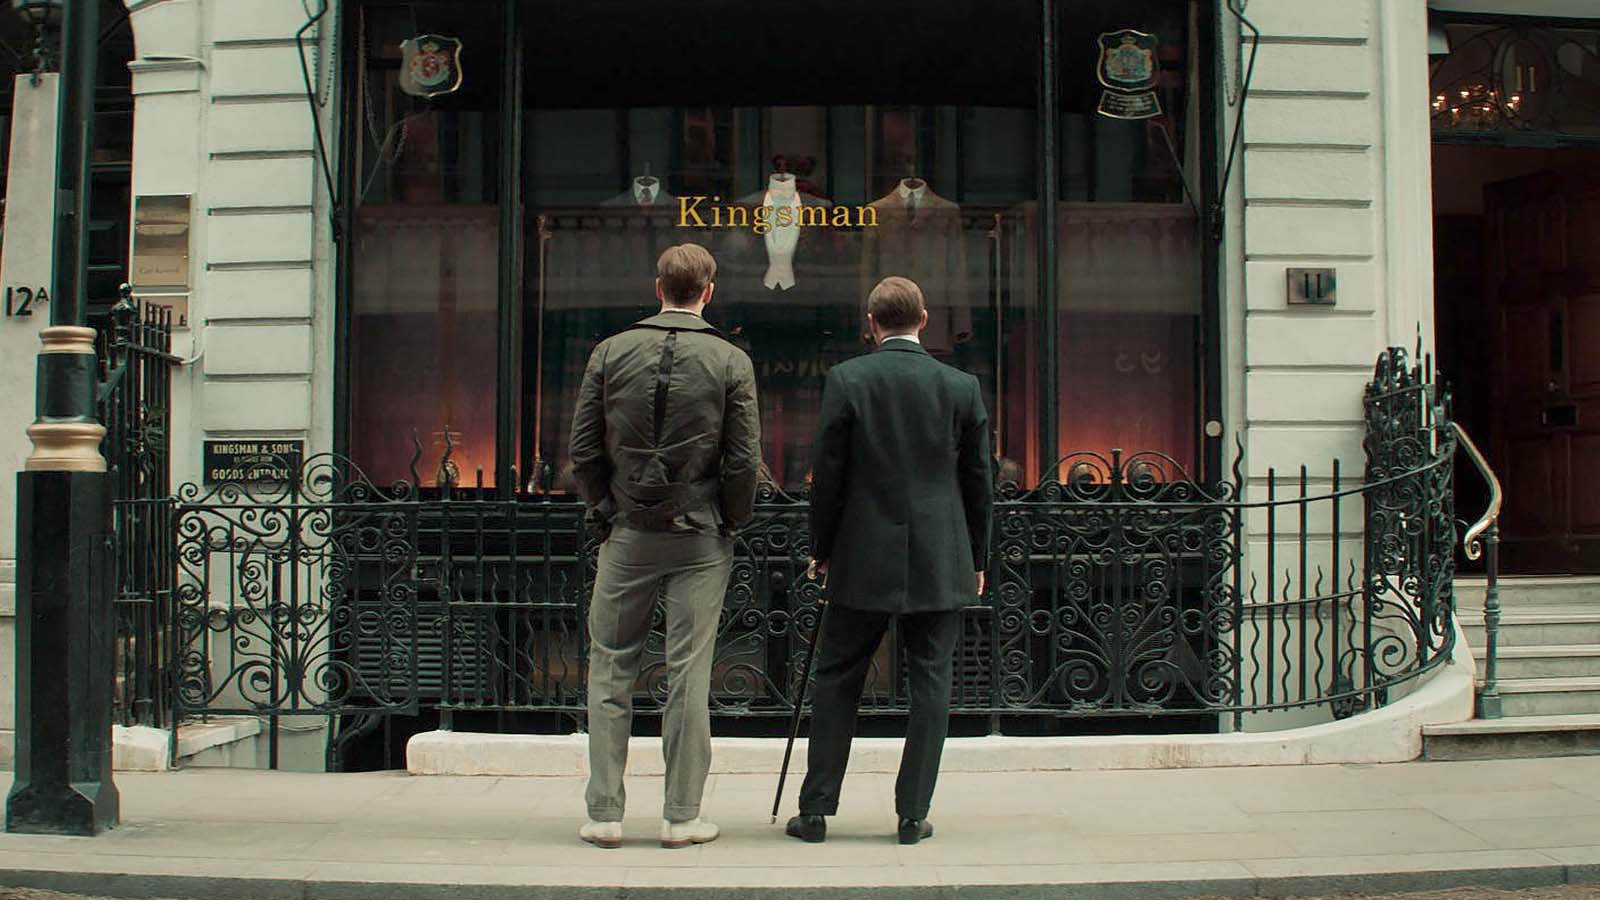 The King’s Man is the origin story of the Kingsman franchise. Image © 20th Century Studios